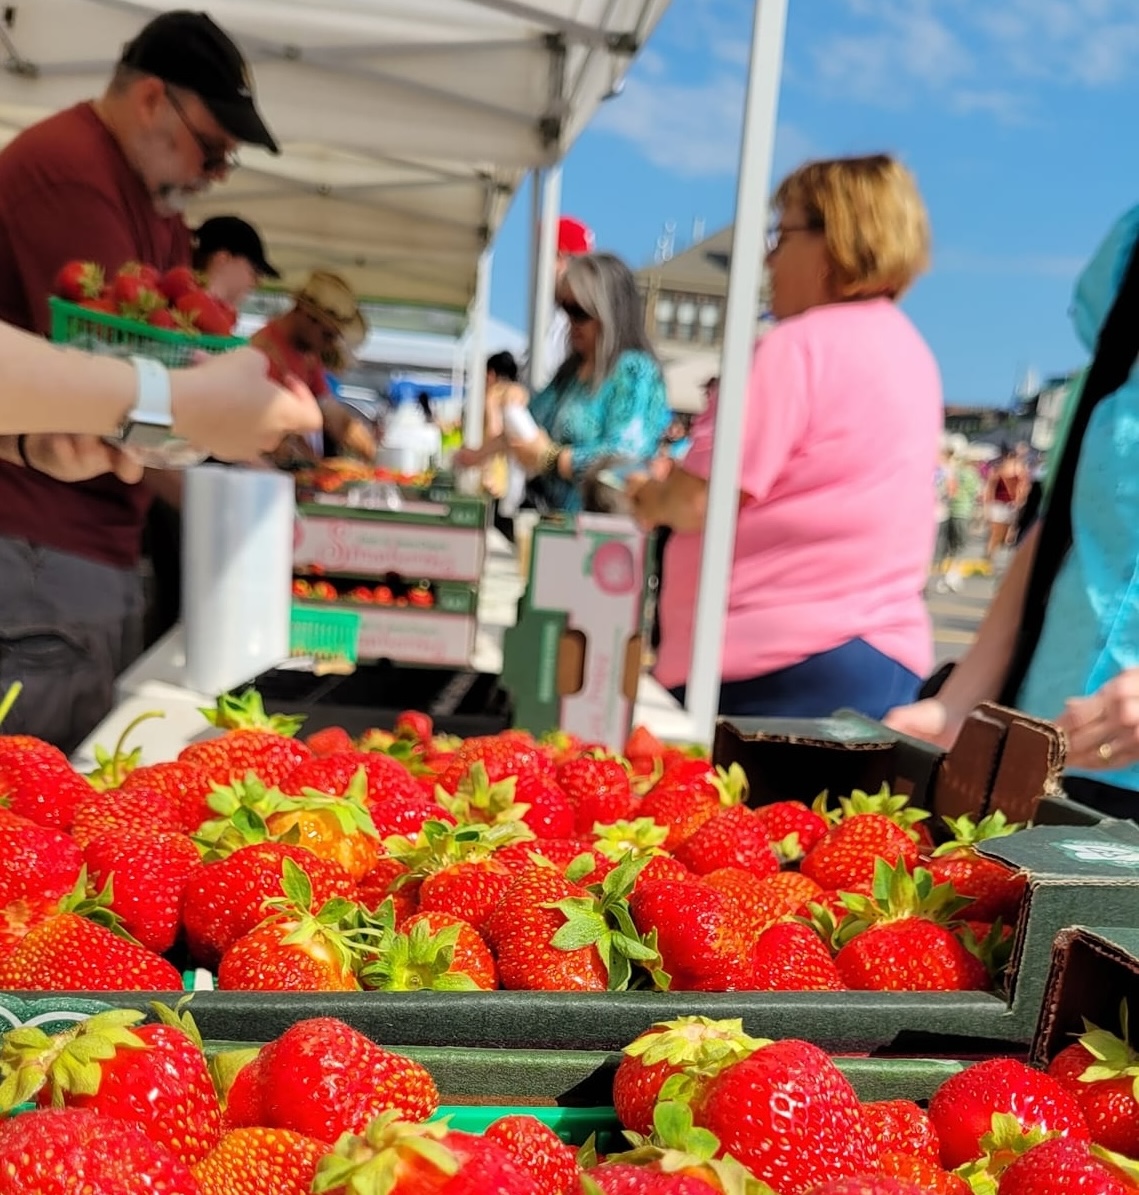 Baskets of red strawberries on a table at a farmers' market, shoppers paying for their produce in the background.